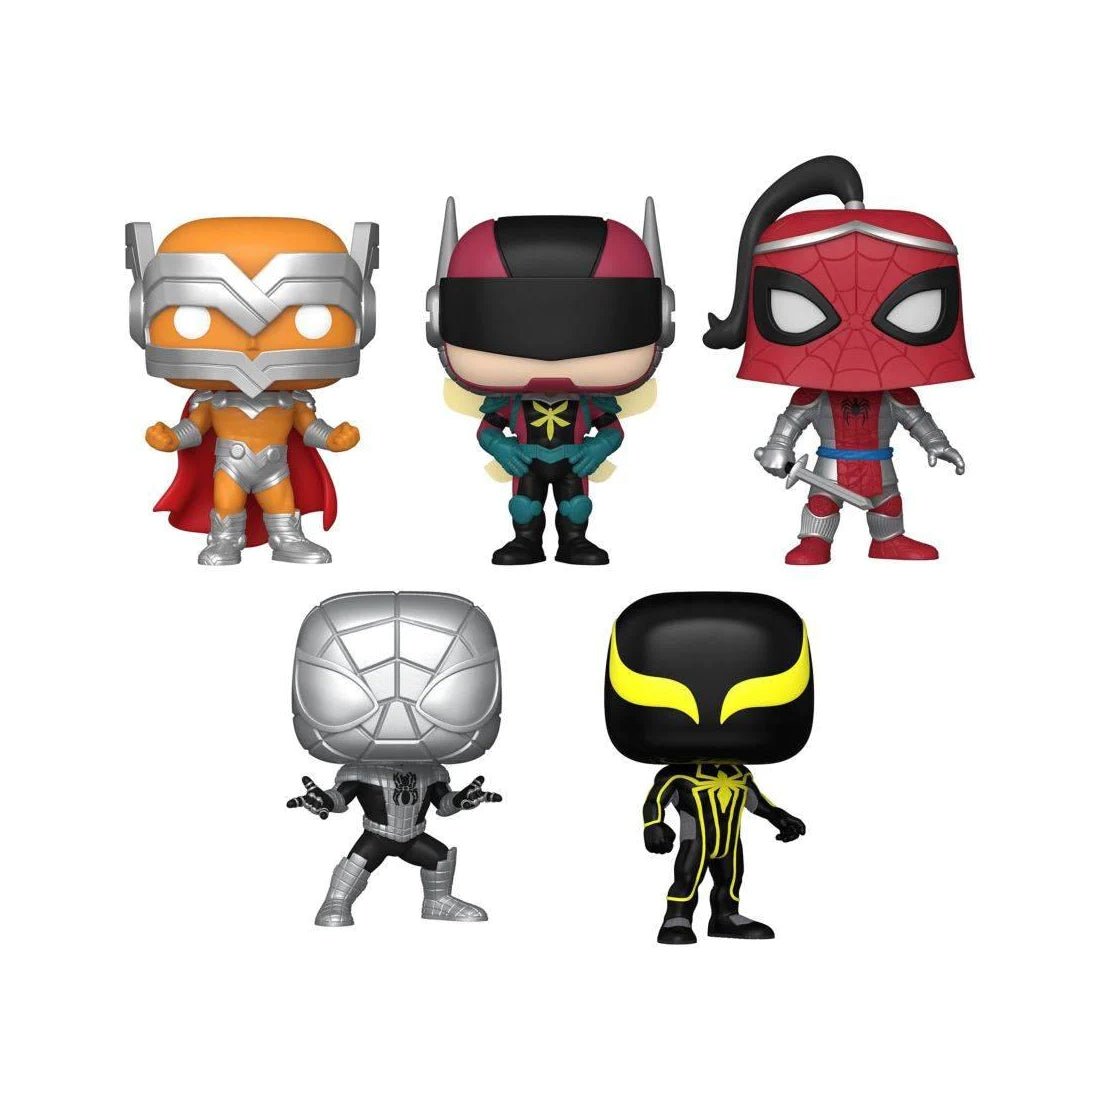 Funko Pop! Marvel: Year of the Spider - 5-Pack (Exclusive) - دمية - Store 974 | ستور ٩٧٤